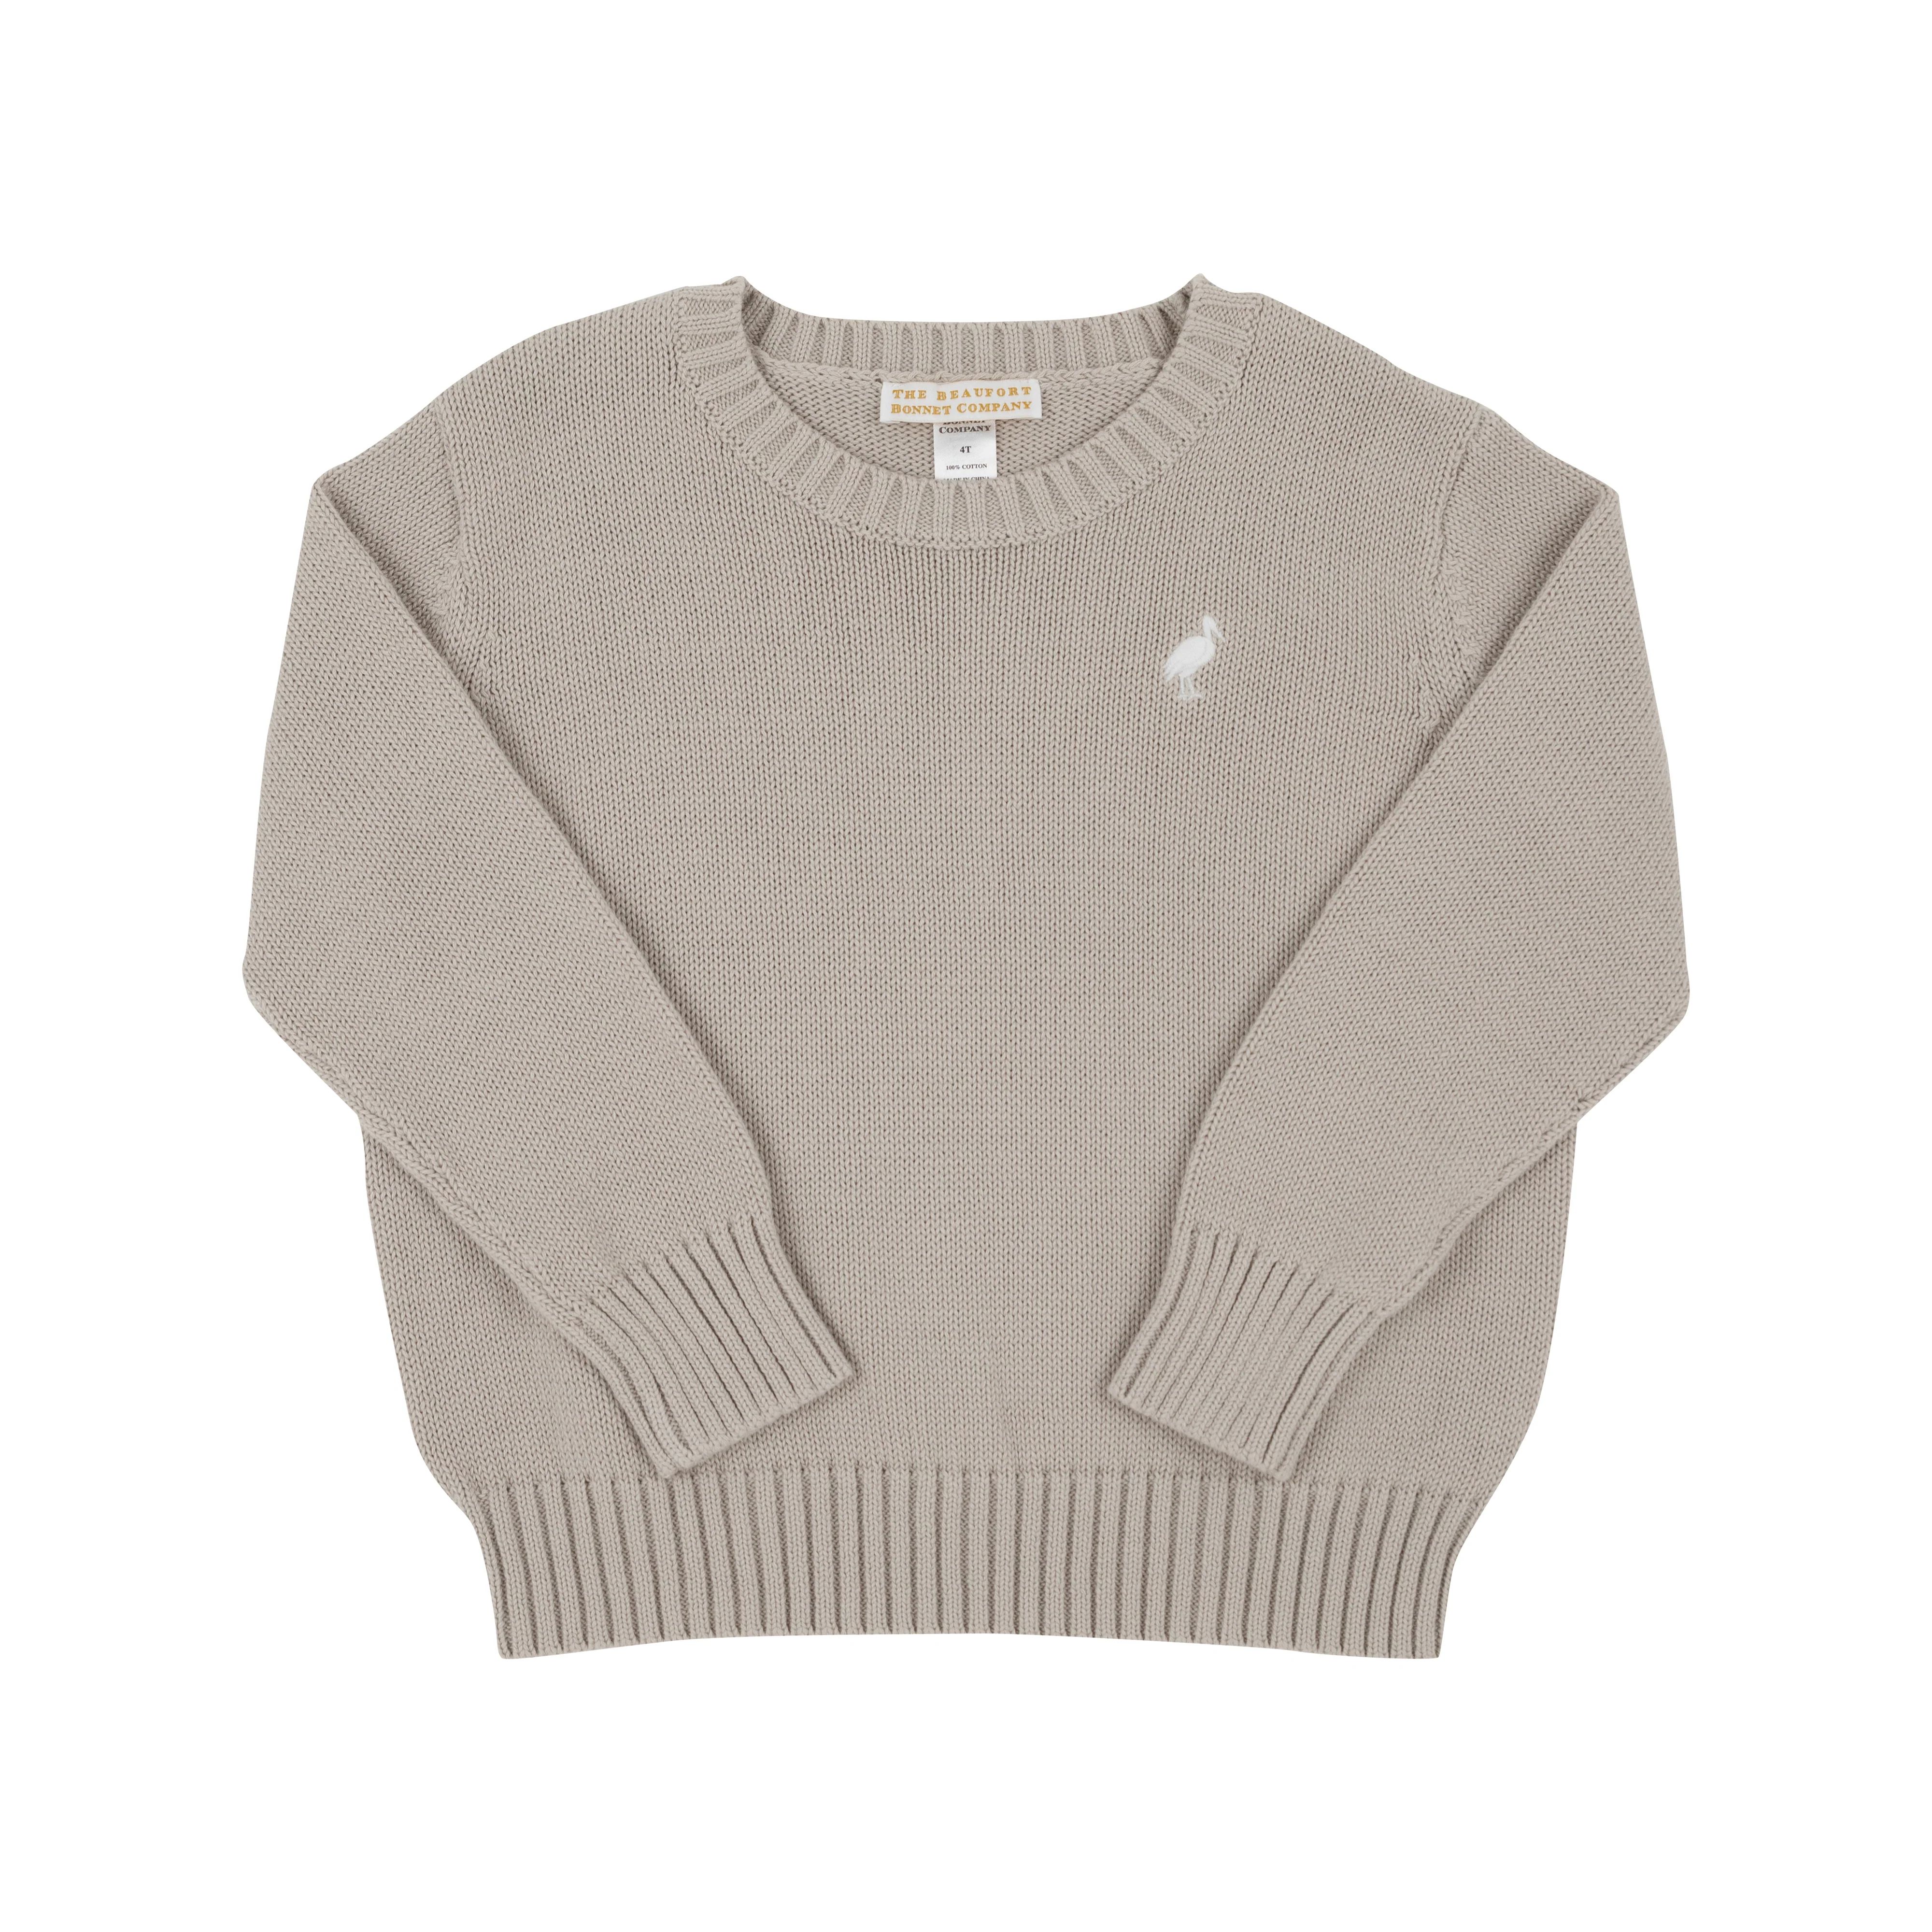 Isaac's Sweater - Tuscaloosa Taupe with Worth Avenue White | The Beaufort Bonnet Company